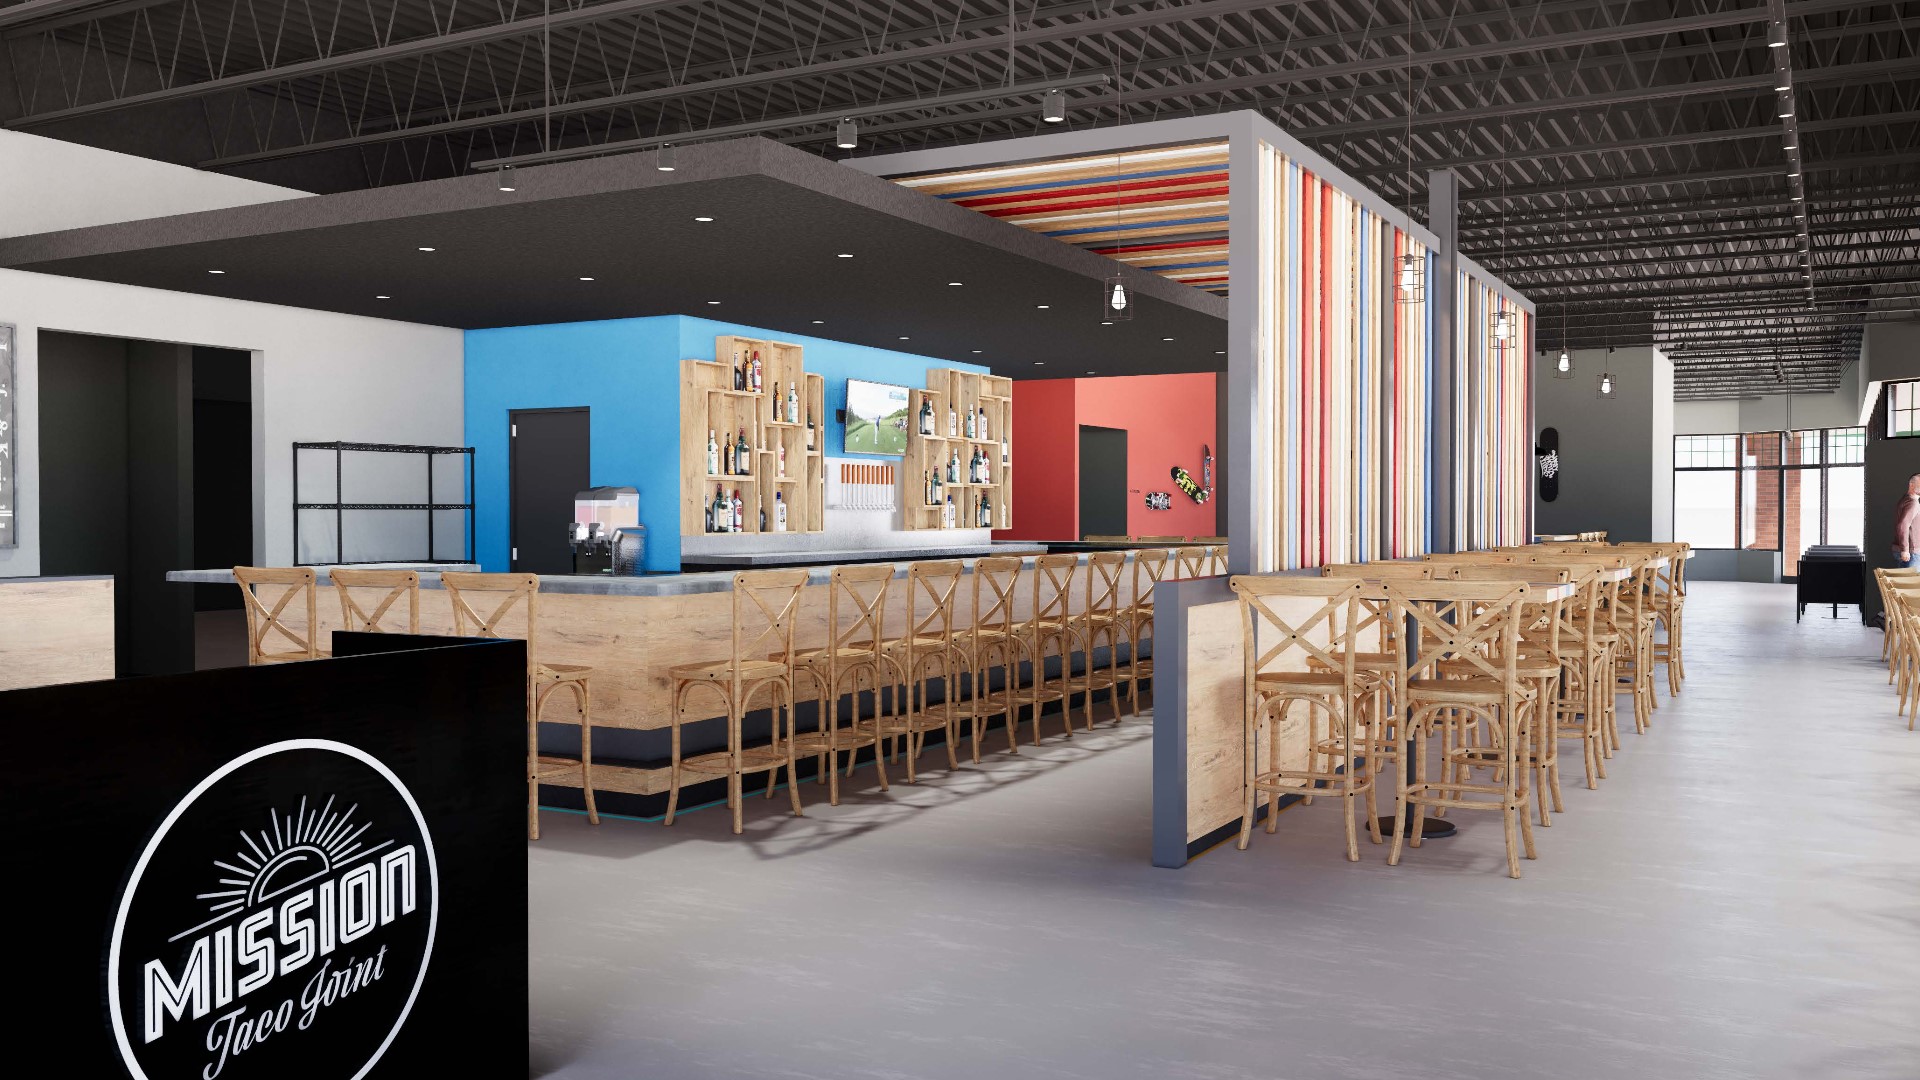 Mission Taco Joint will open its newest location at the Clayton Village Shopping Center in Town and Country. It's scheduled to open in late 2023.